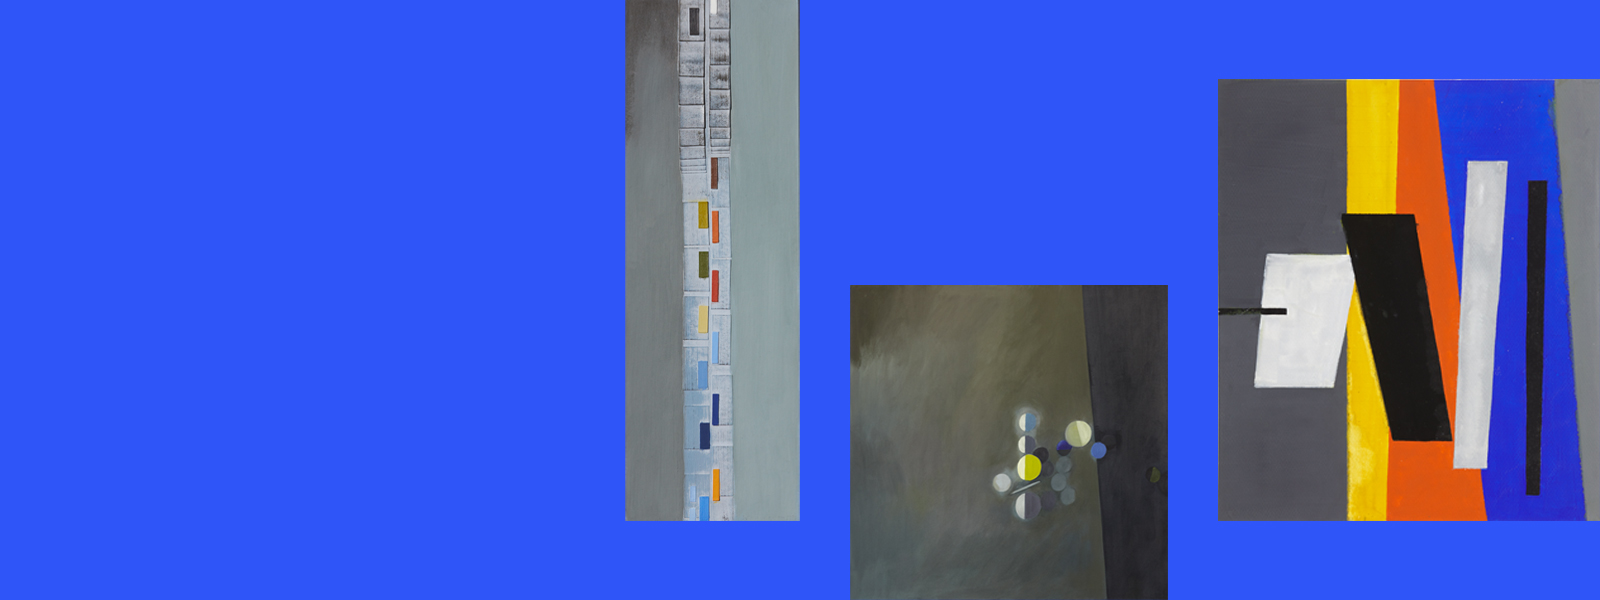 The artworks grouped on a bright blue background. From left to right: a narrow vertical relief with a strip of small rectangles in bright colours on a grey background; an abstract painting with dark green/grey background and a cluster of small circles in lime green, blues and greys; a painting of two layers of parallelograms in grey, yellow, orange and blue in back layer and white and black in front layer